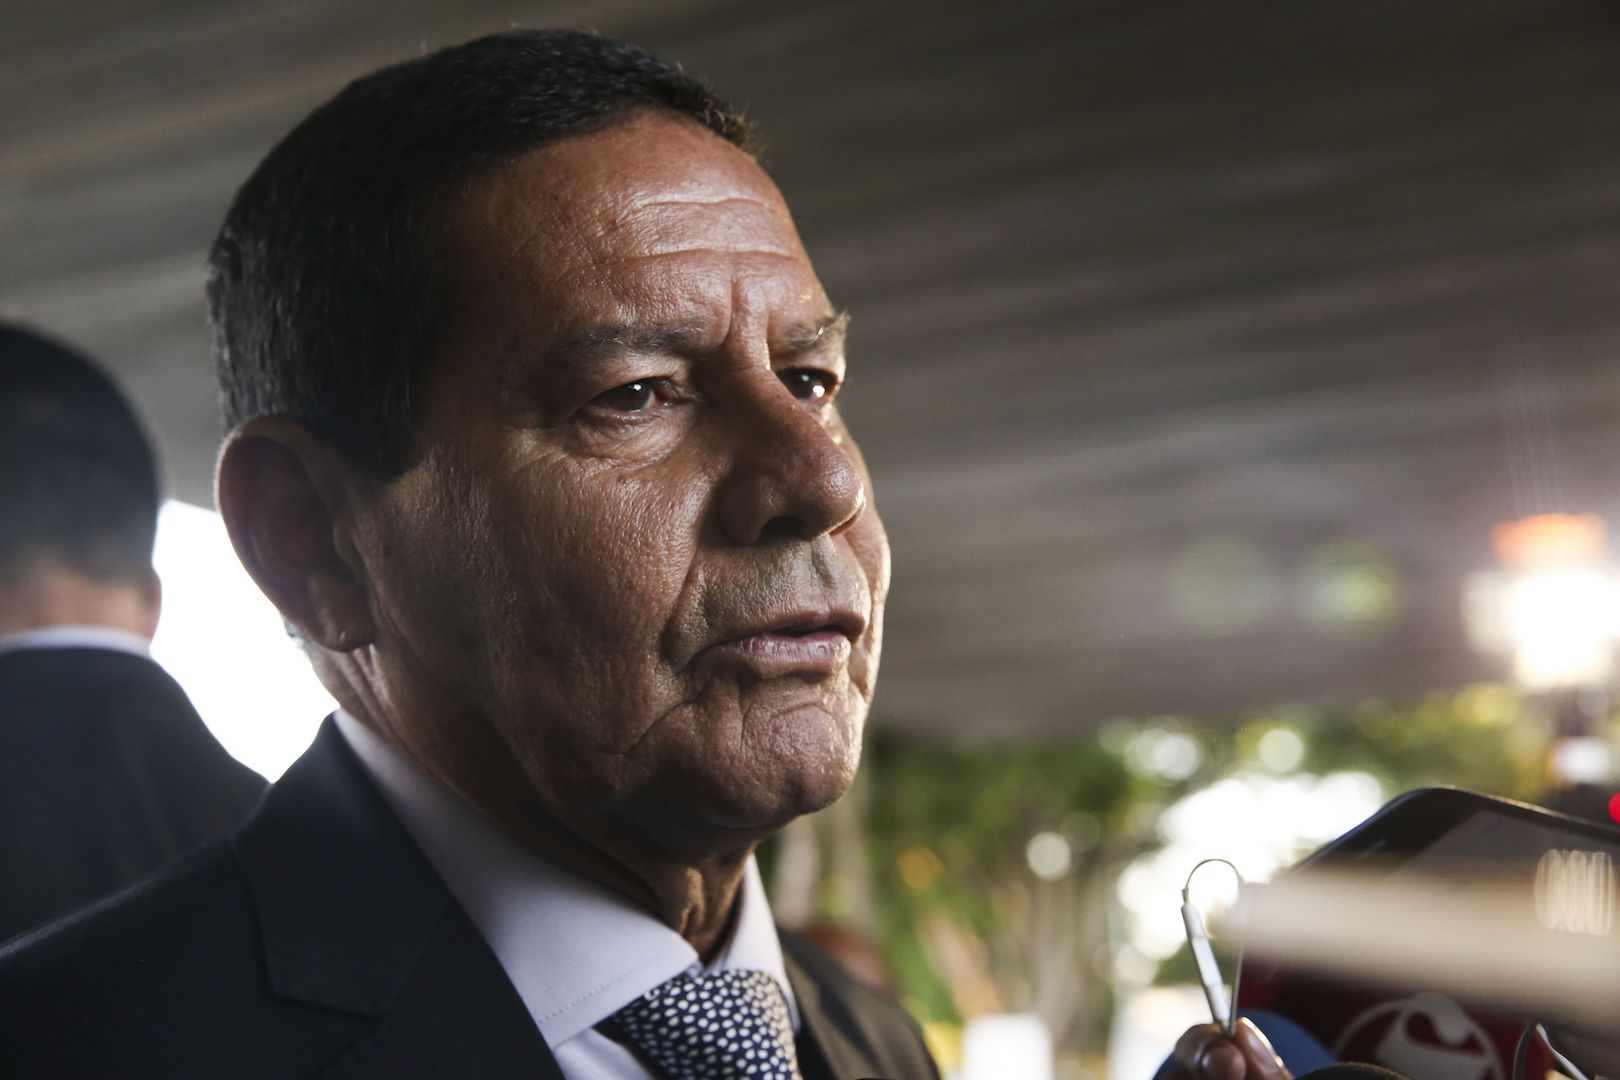 In a live stream from Itaú Bank, Vice-President Hamilton Mourão said on Monday, November 9th, that Brazil "never left the first wave" of Covid-19 and stressed that caution is needed with a vaccine against the disease. Mourão also said that it is difficult to predict when the immunizer will be available.